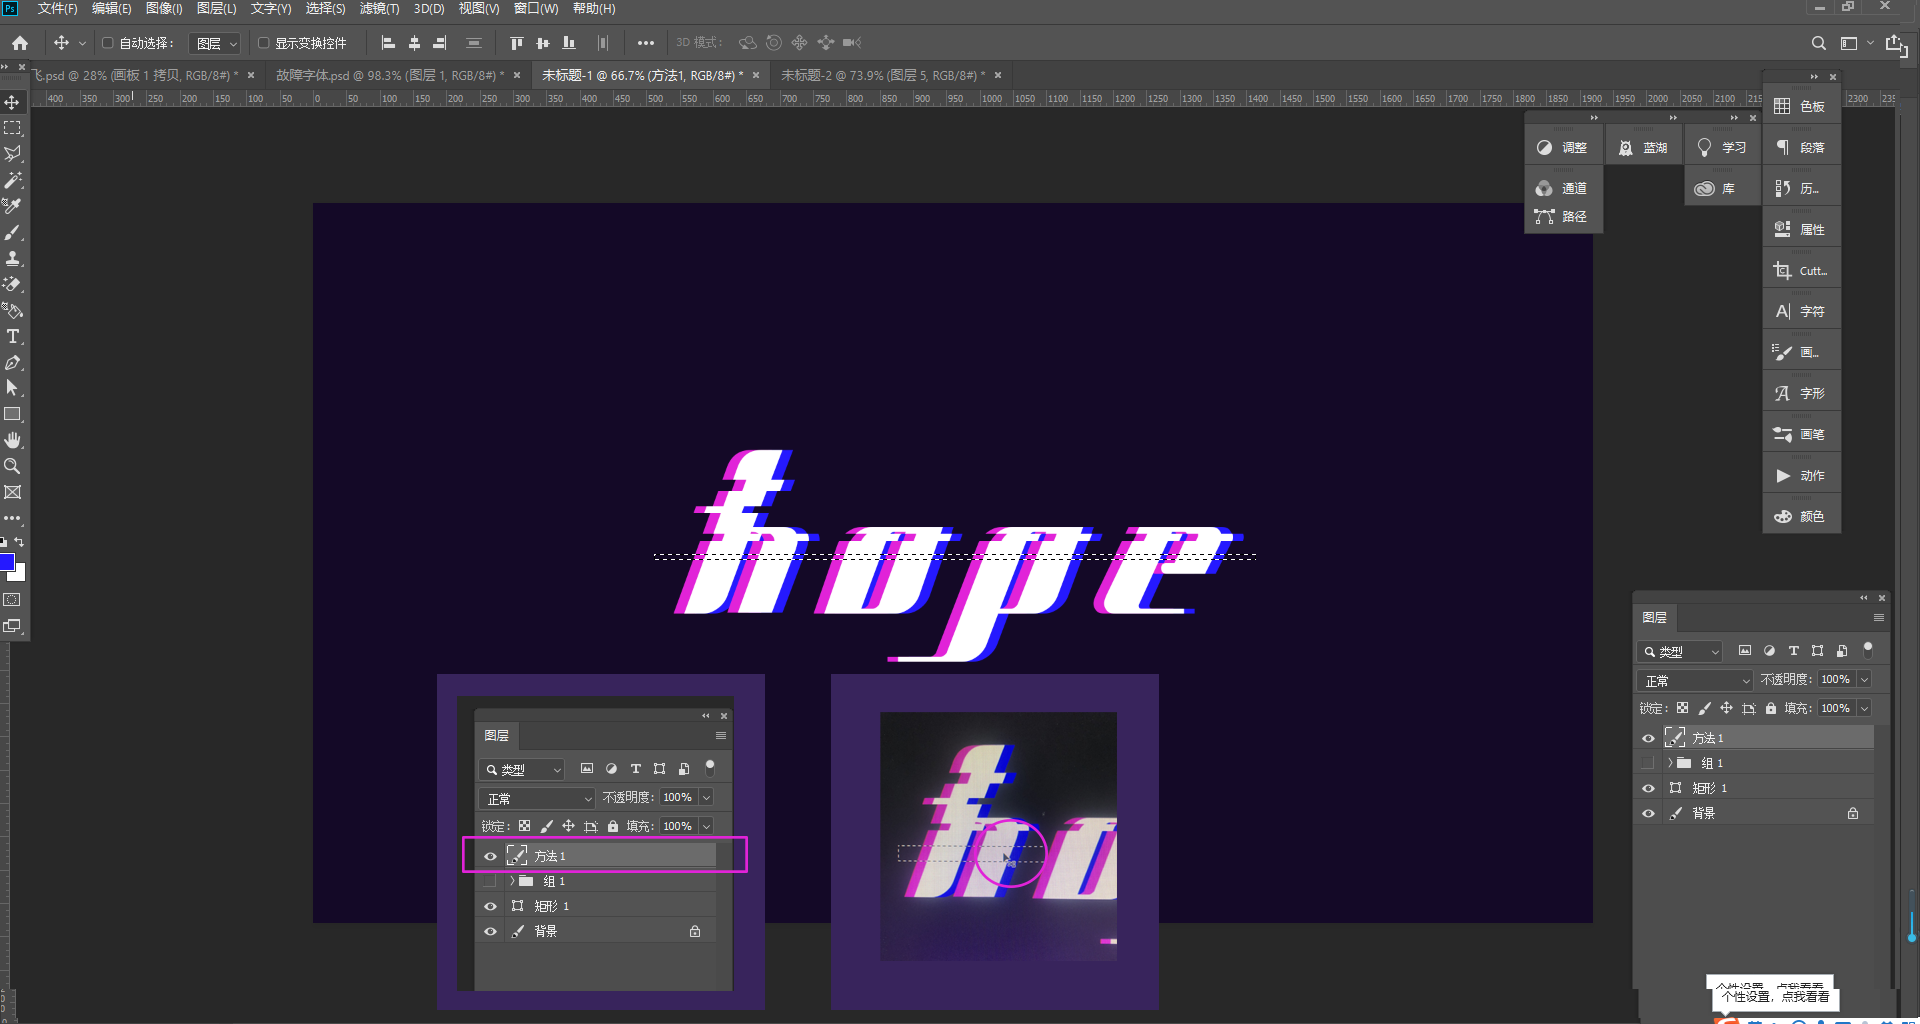 PS making fault wind font tutorial, easy to change text